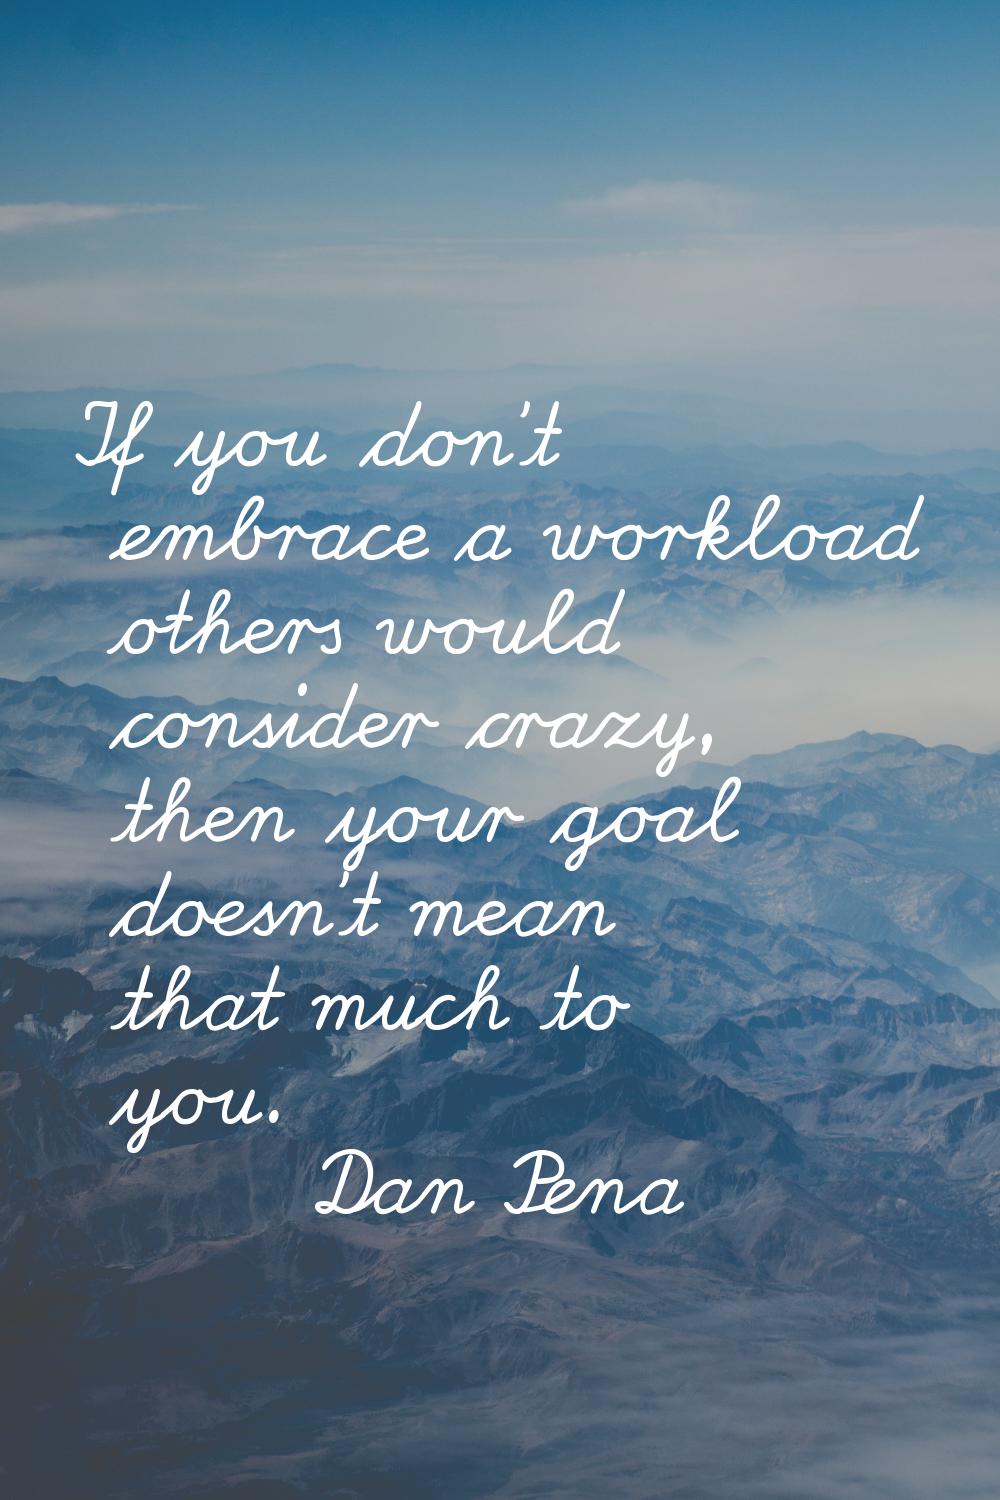 If you don't embrace a workload others would consider crazy, then your goal doesn't mean that much 